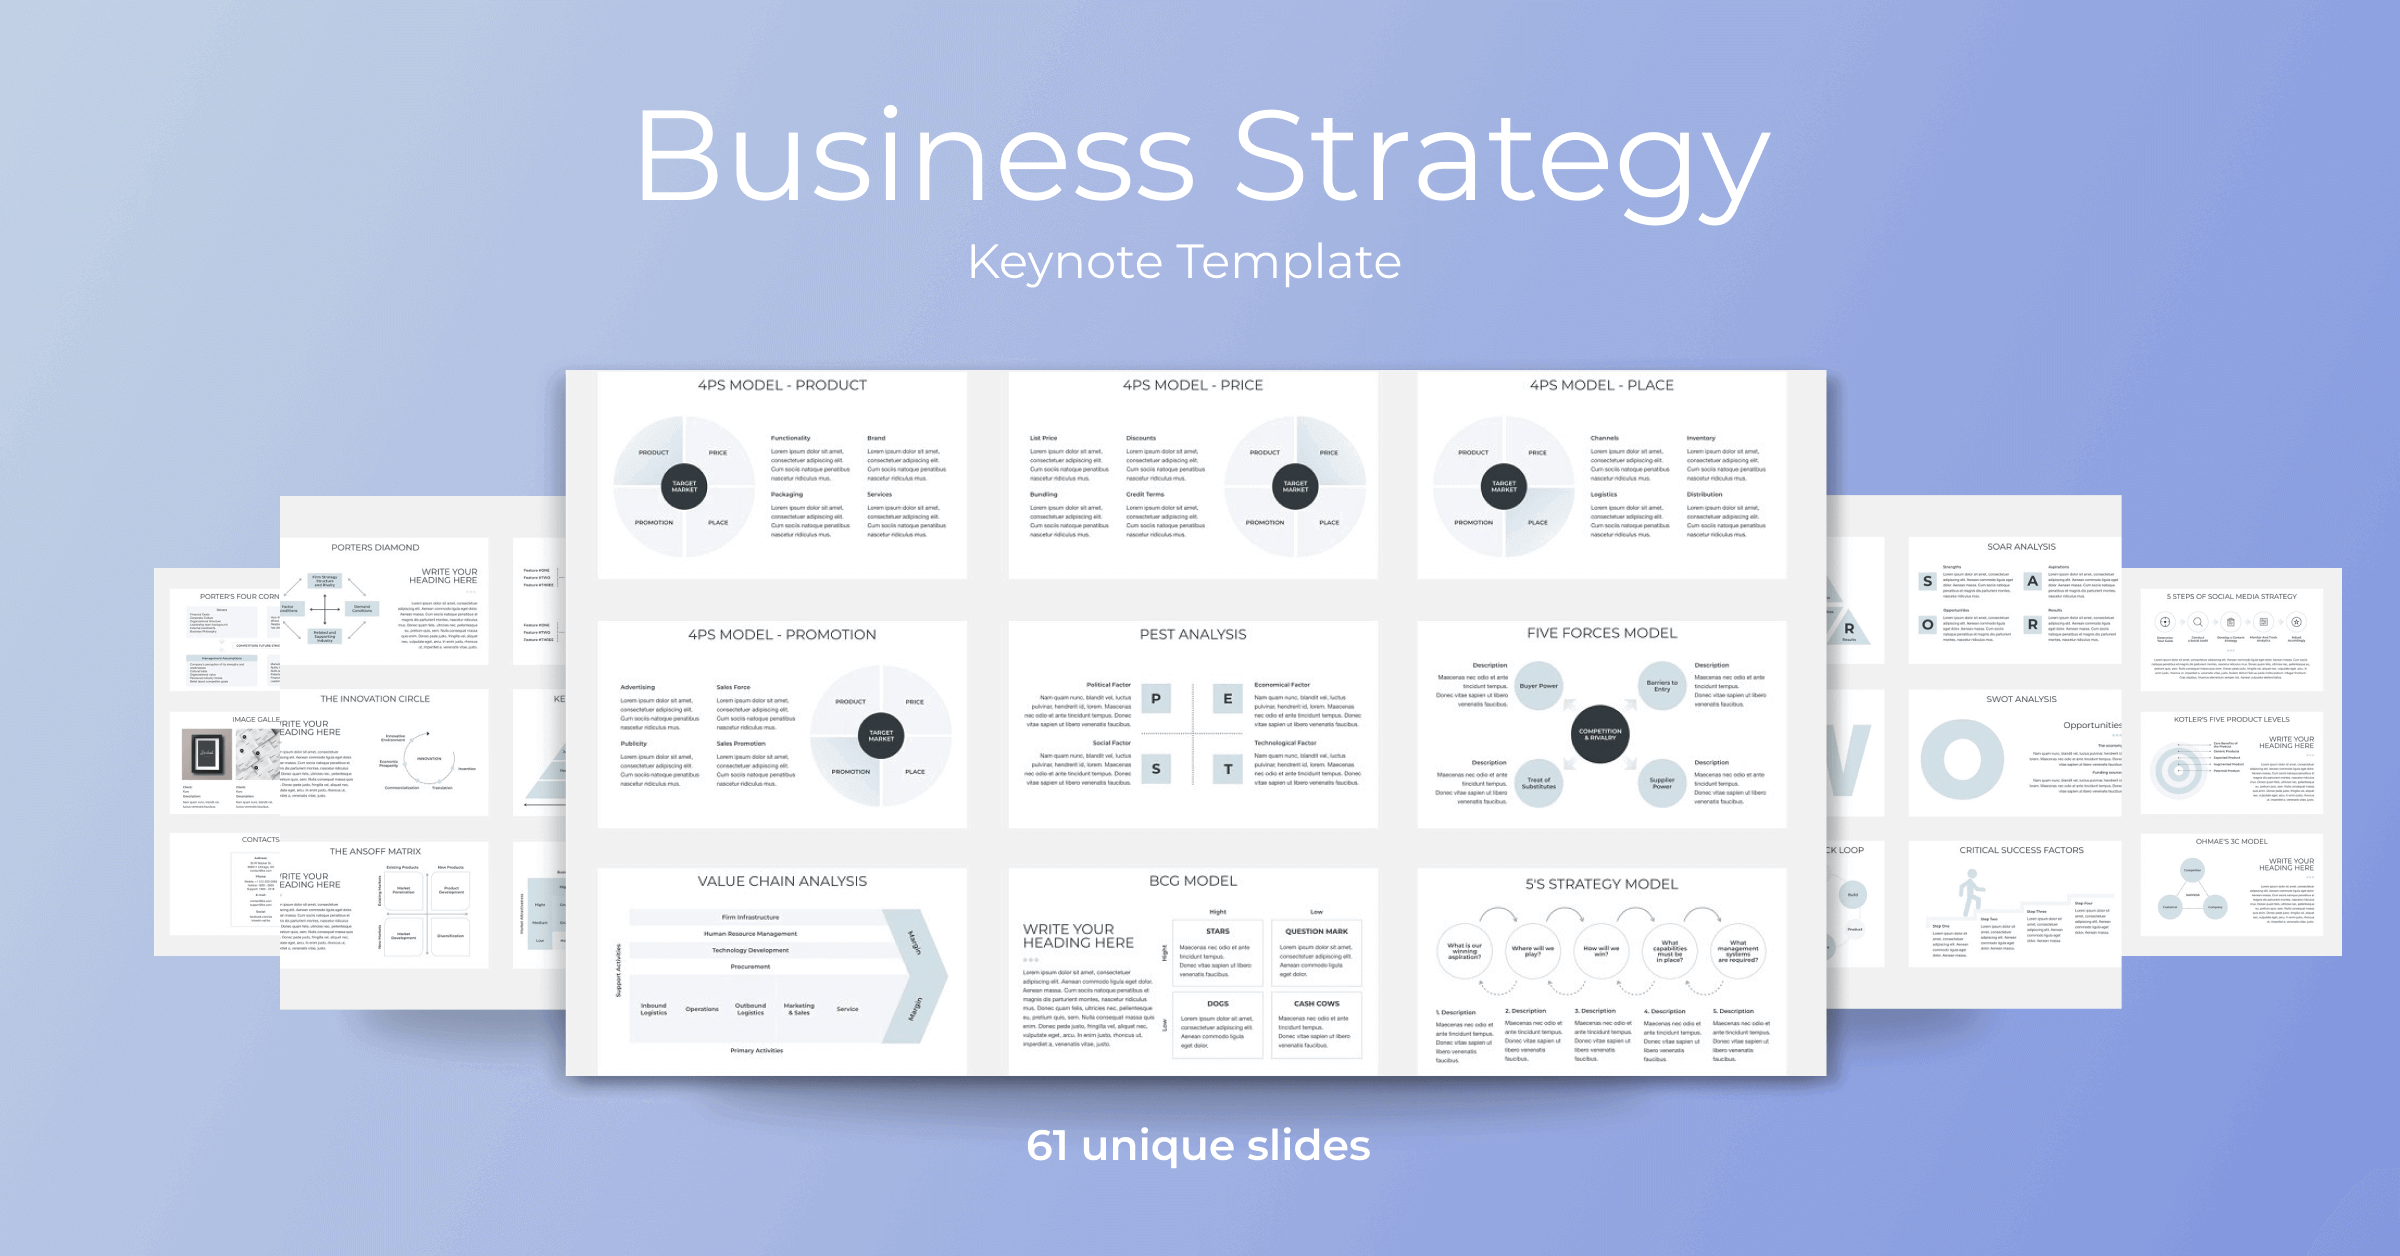 Business Strategy Keynote Template on Blue Background.